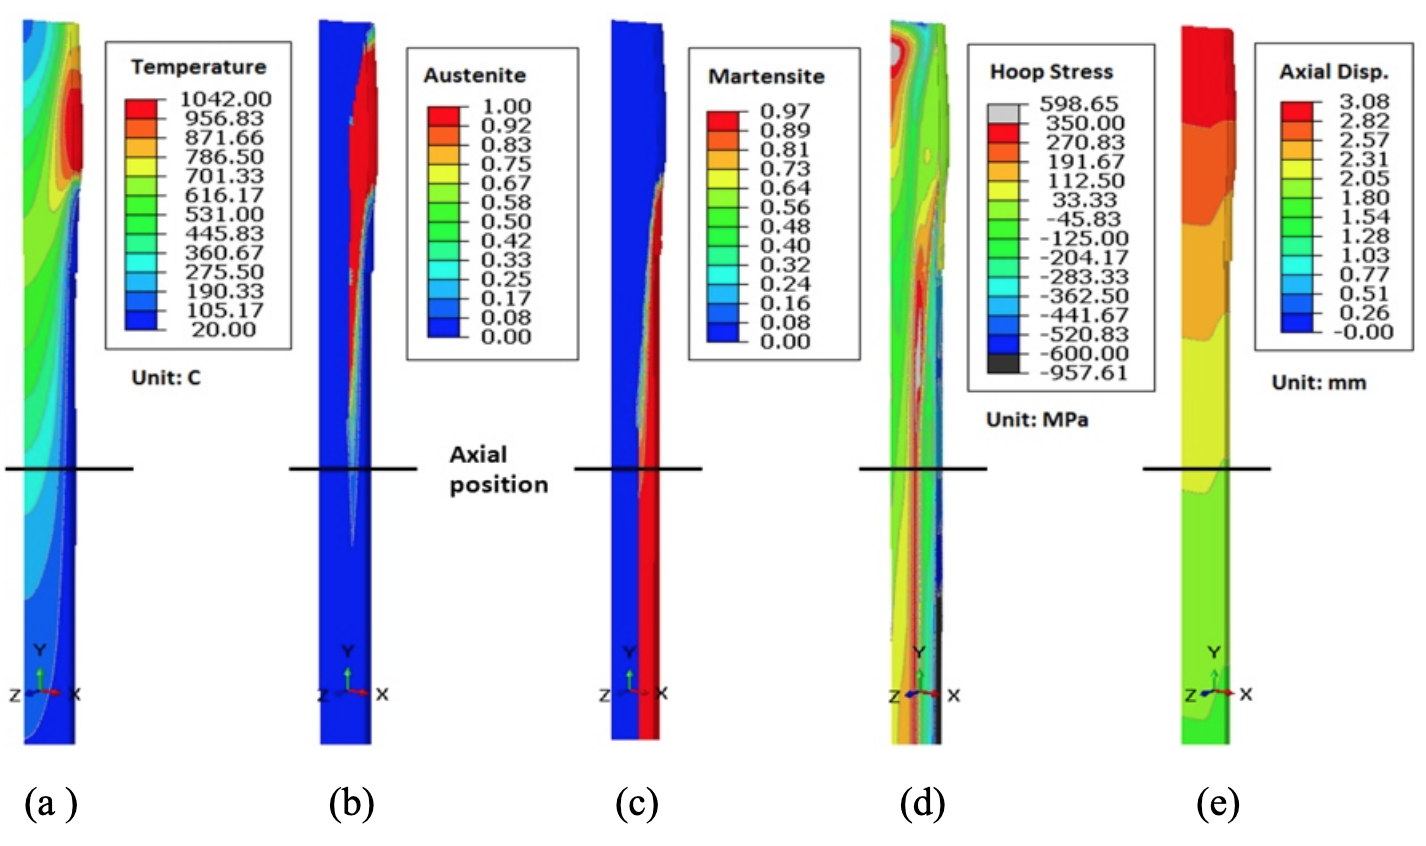 Fluxtrol - Modeling Stress and Distortion of Full-Float Truck Axle During Induction Hardening Process - Figure 5 (a) Temperature, (b) austenite phase, (c) martensite, (d) hoop stress, and (e) axial displacement distributions at the end of heating process (130.15 second).